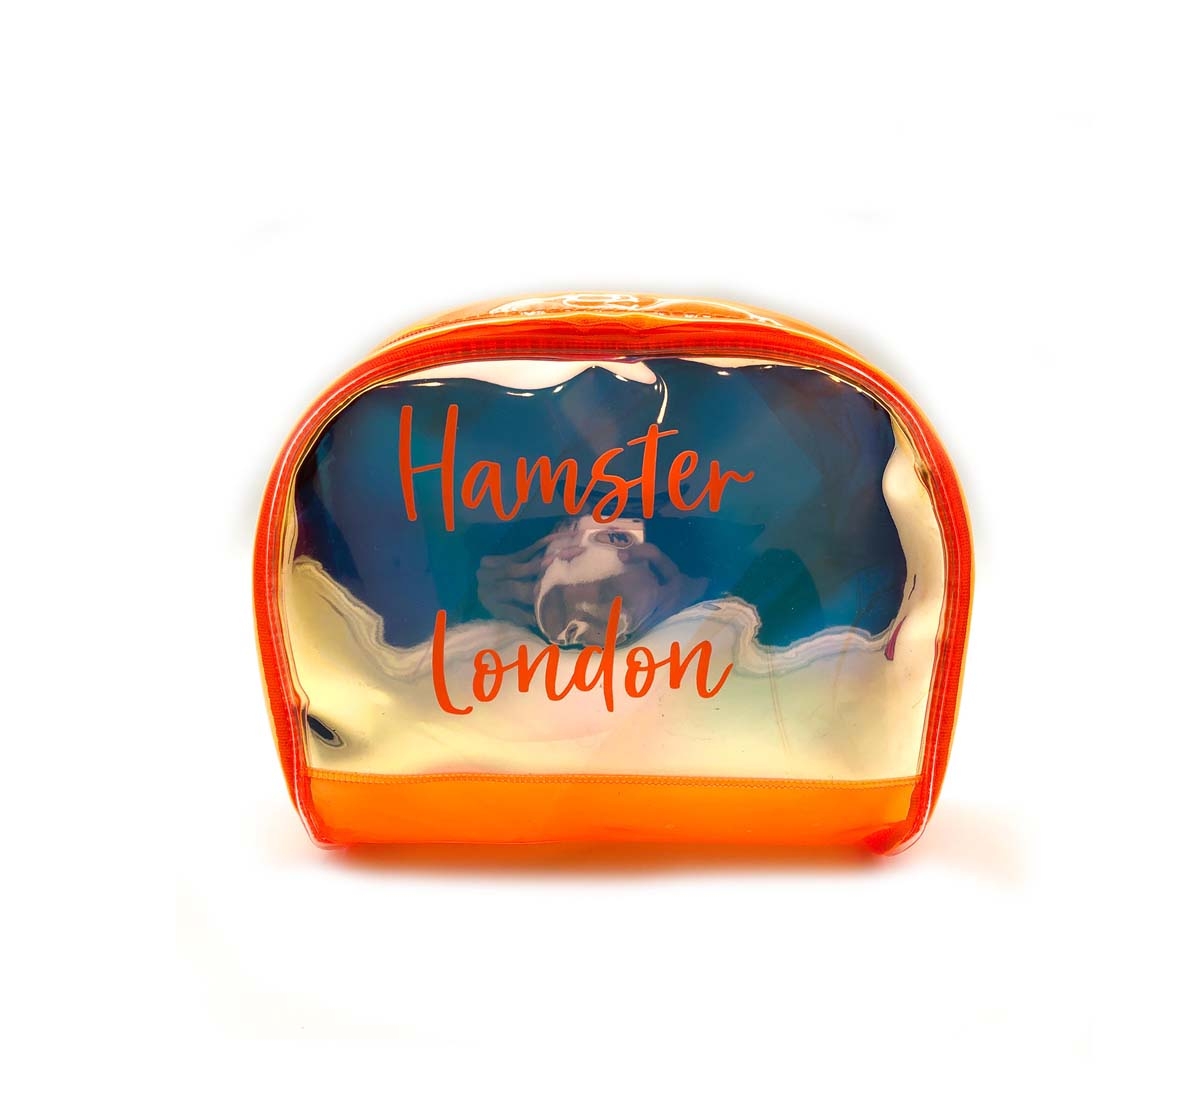 Hamster London Shell Pouch Orange Bags for Girls Age 3Y+ (Orange)